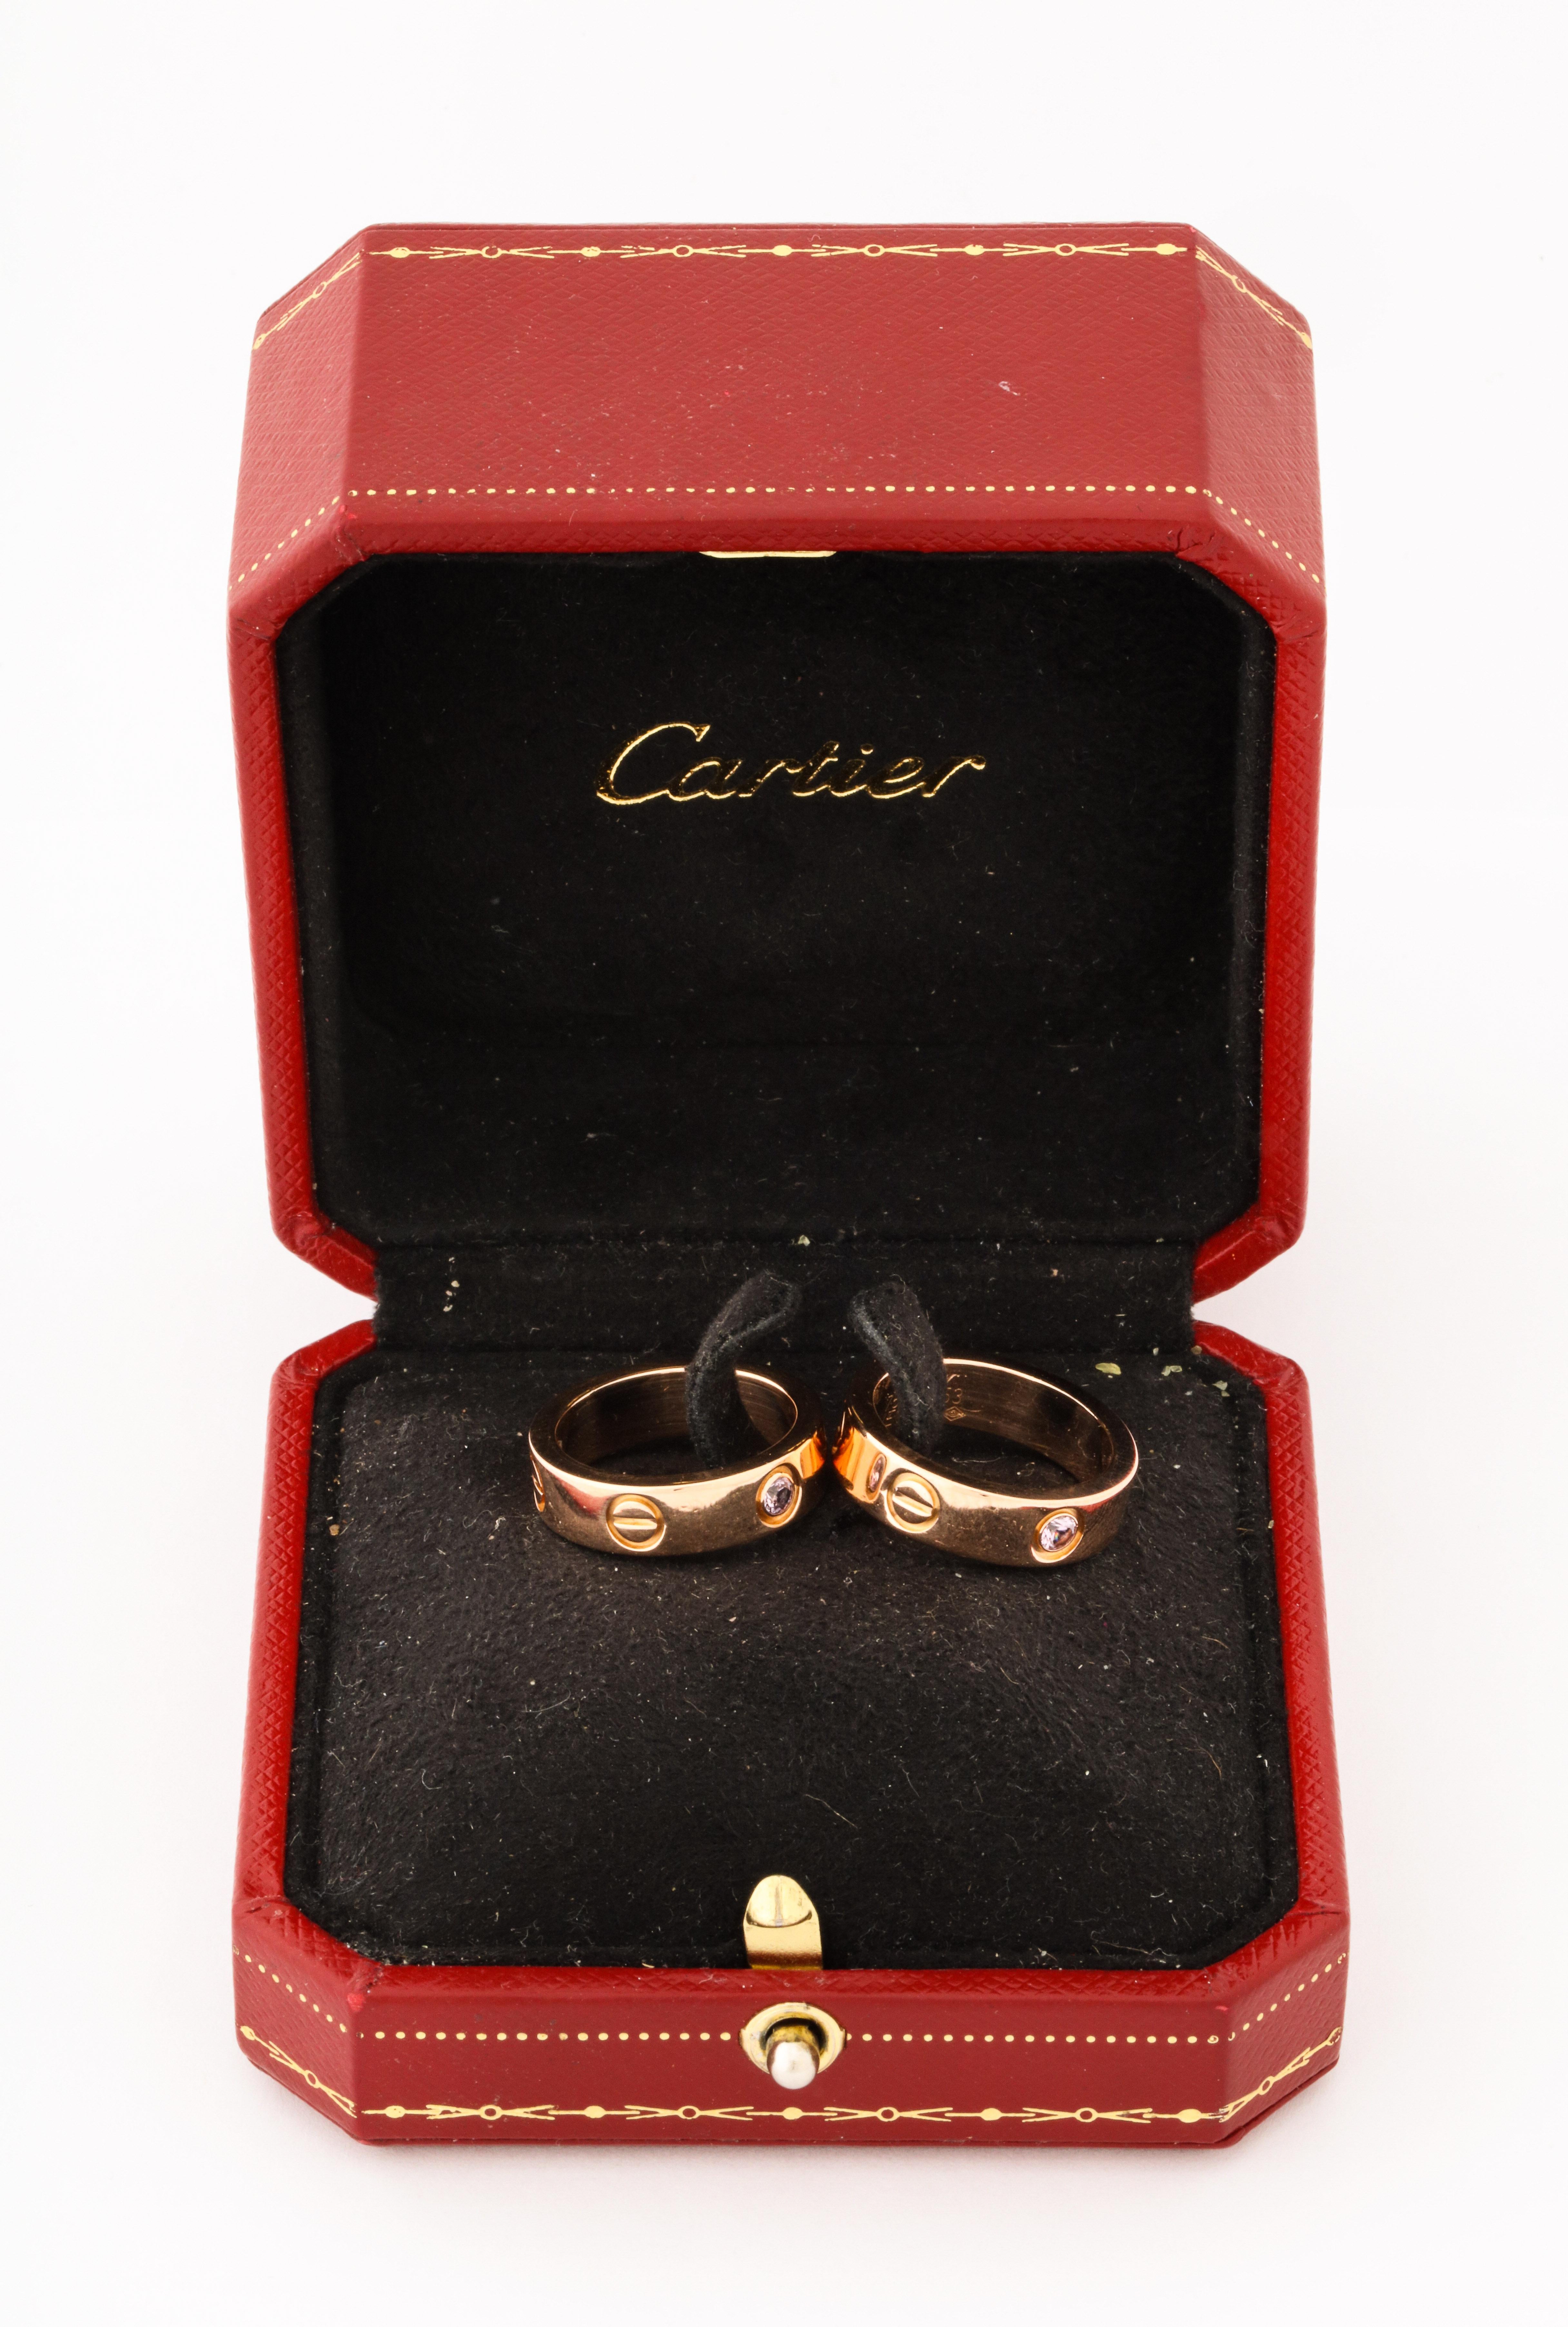 A pair of Cartier 18K Love rings with pink sapphires. They are a matching pair worn 
together with one a little larger to accommodate the fit.
They are in the original Cartier box. 